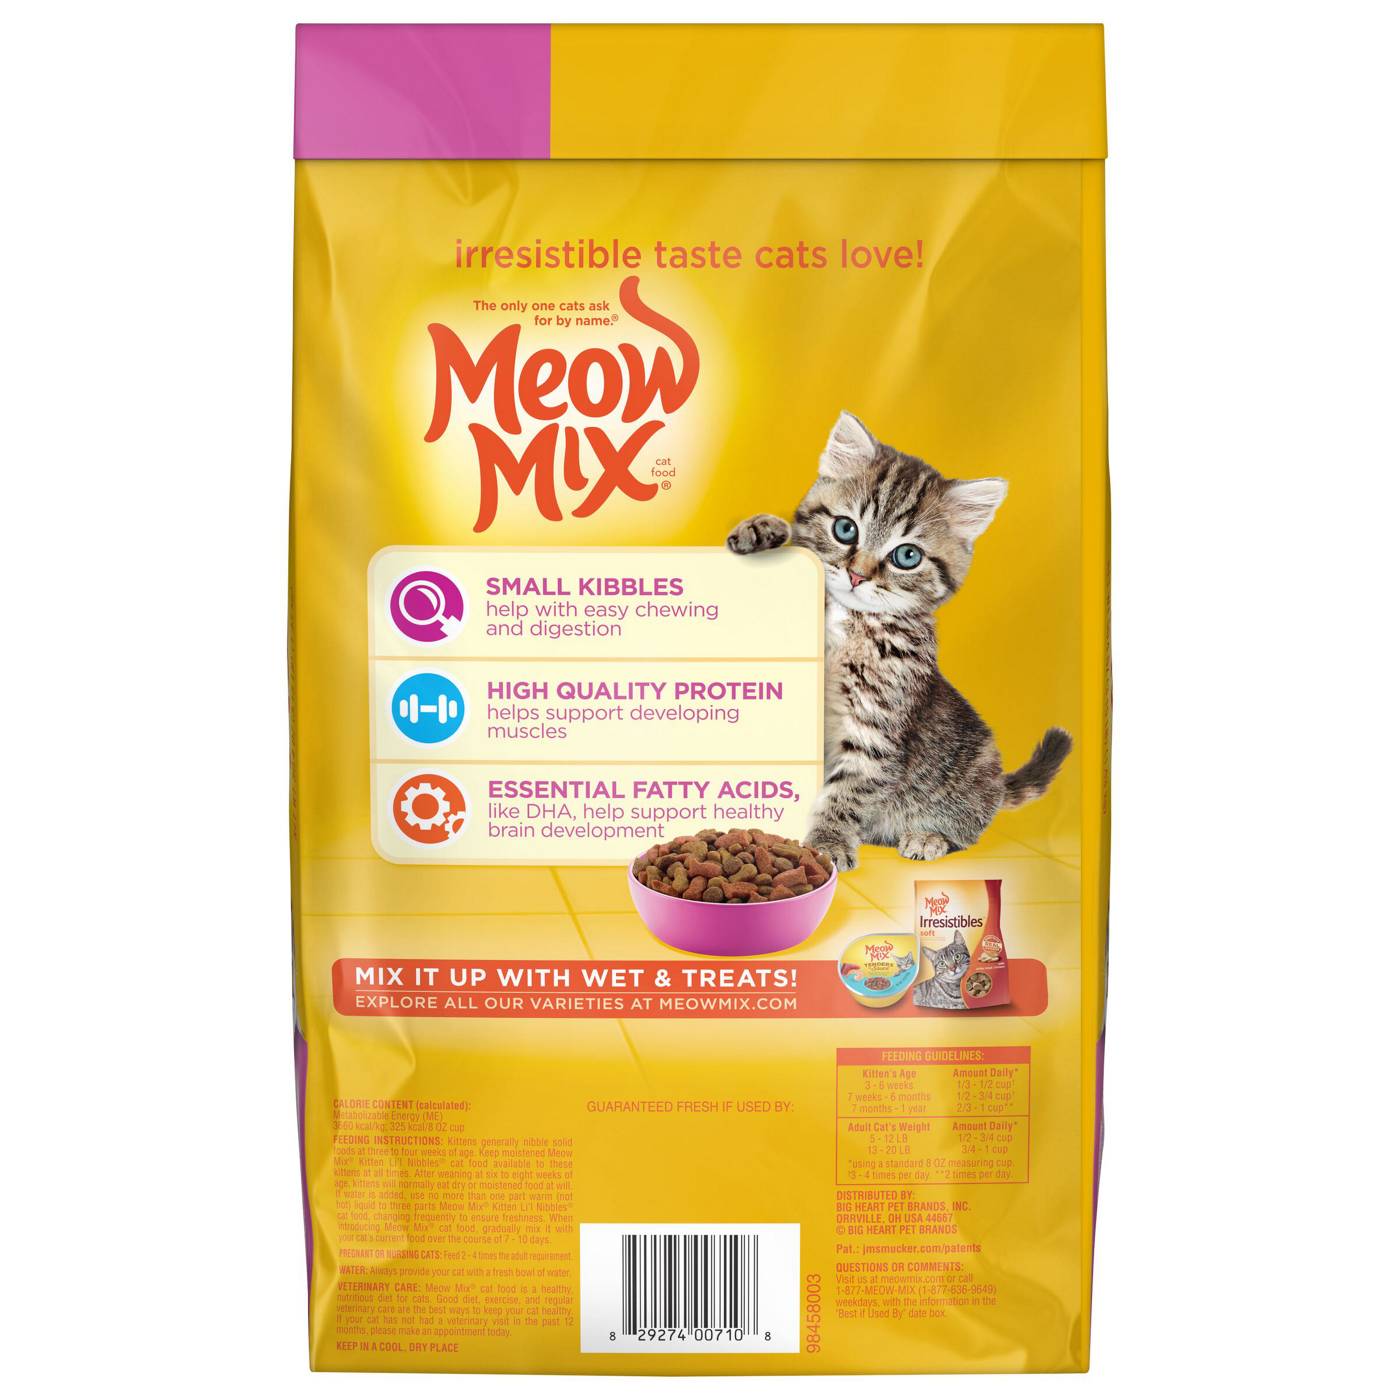 Meow Mix Kitten Lil' Nibbles Dry Cat Food; image 7 of 7